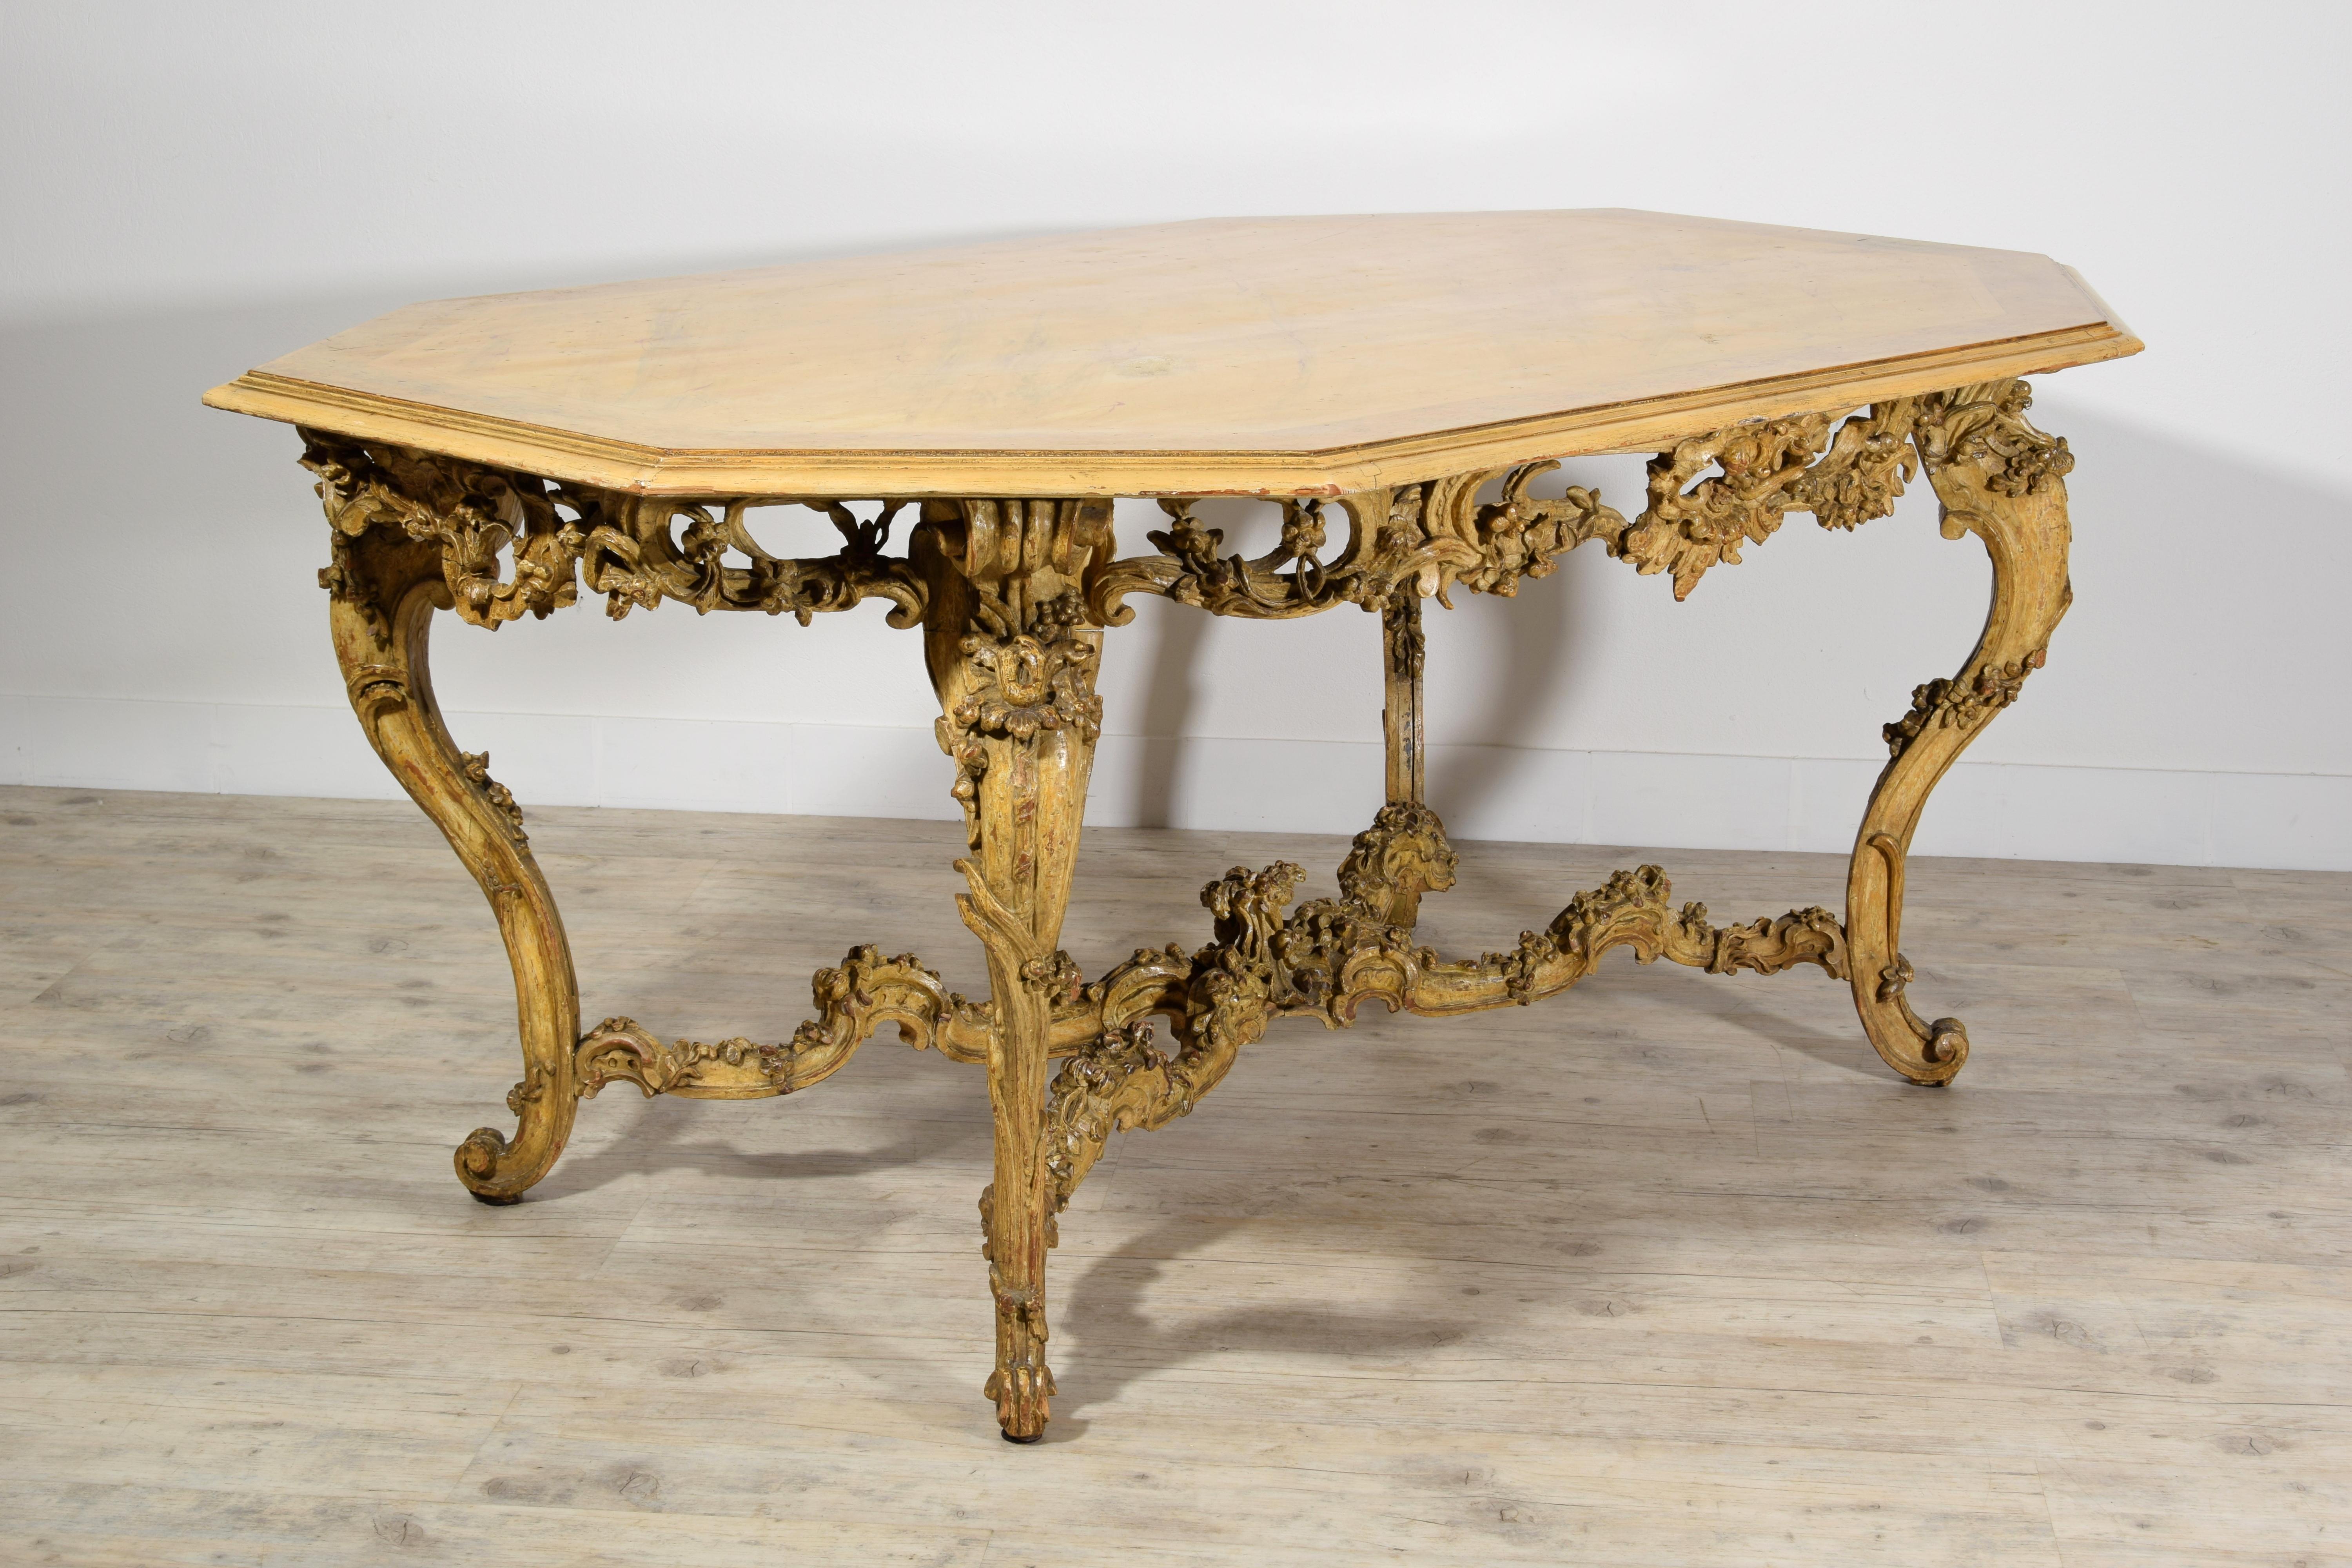 Italian Baroque carved gilt and lacquered wood center table, 18th century 
This particular center table is made of golden and lacquered in ochre finely carved wood with rich floral decorations. The band below the top has a perforated ornament with